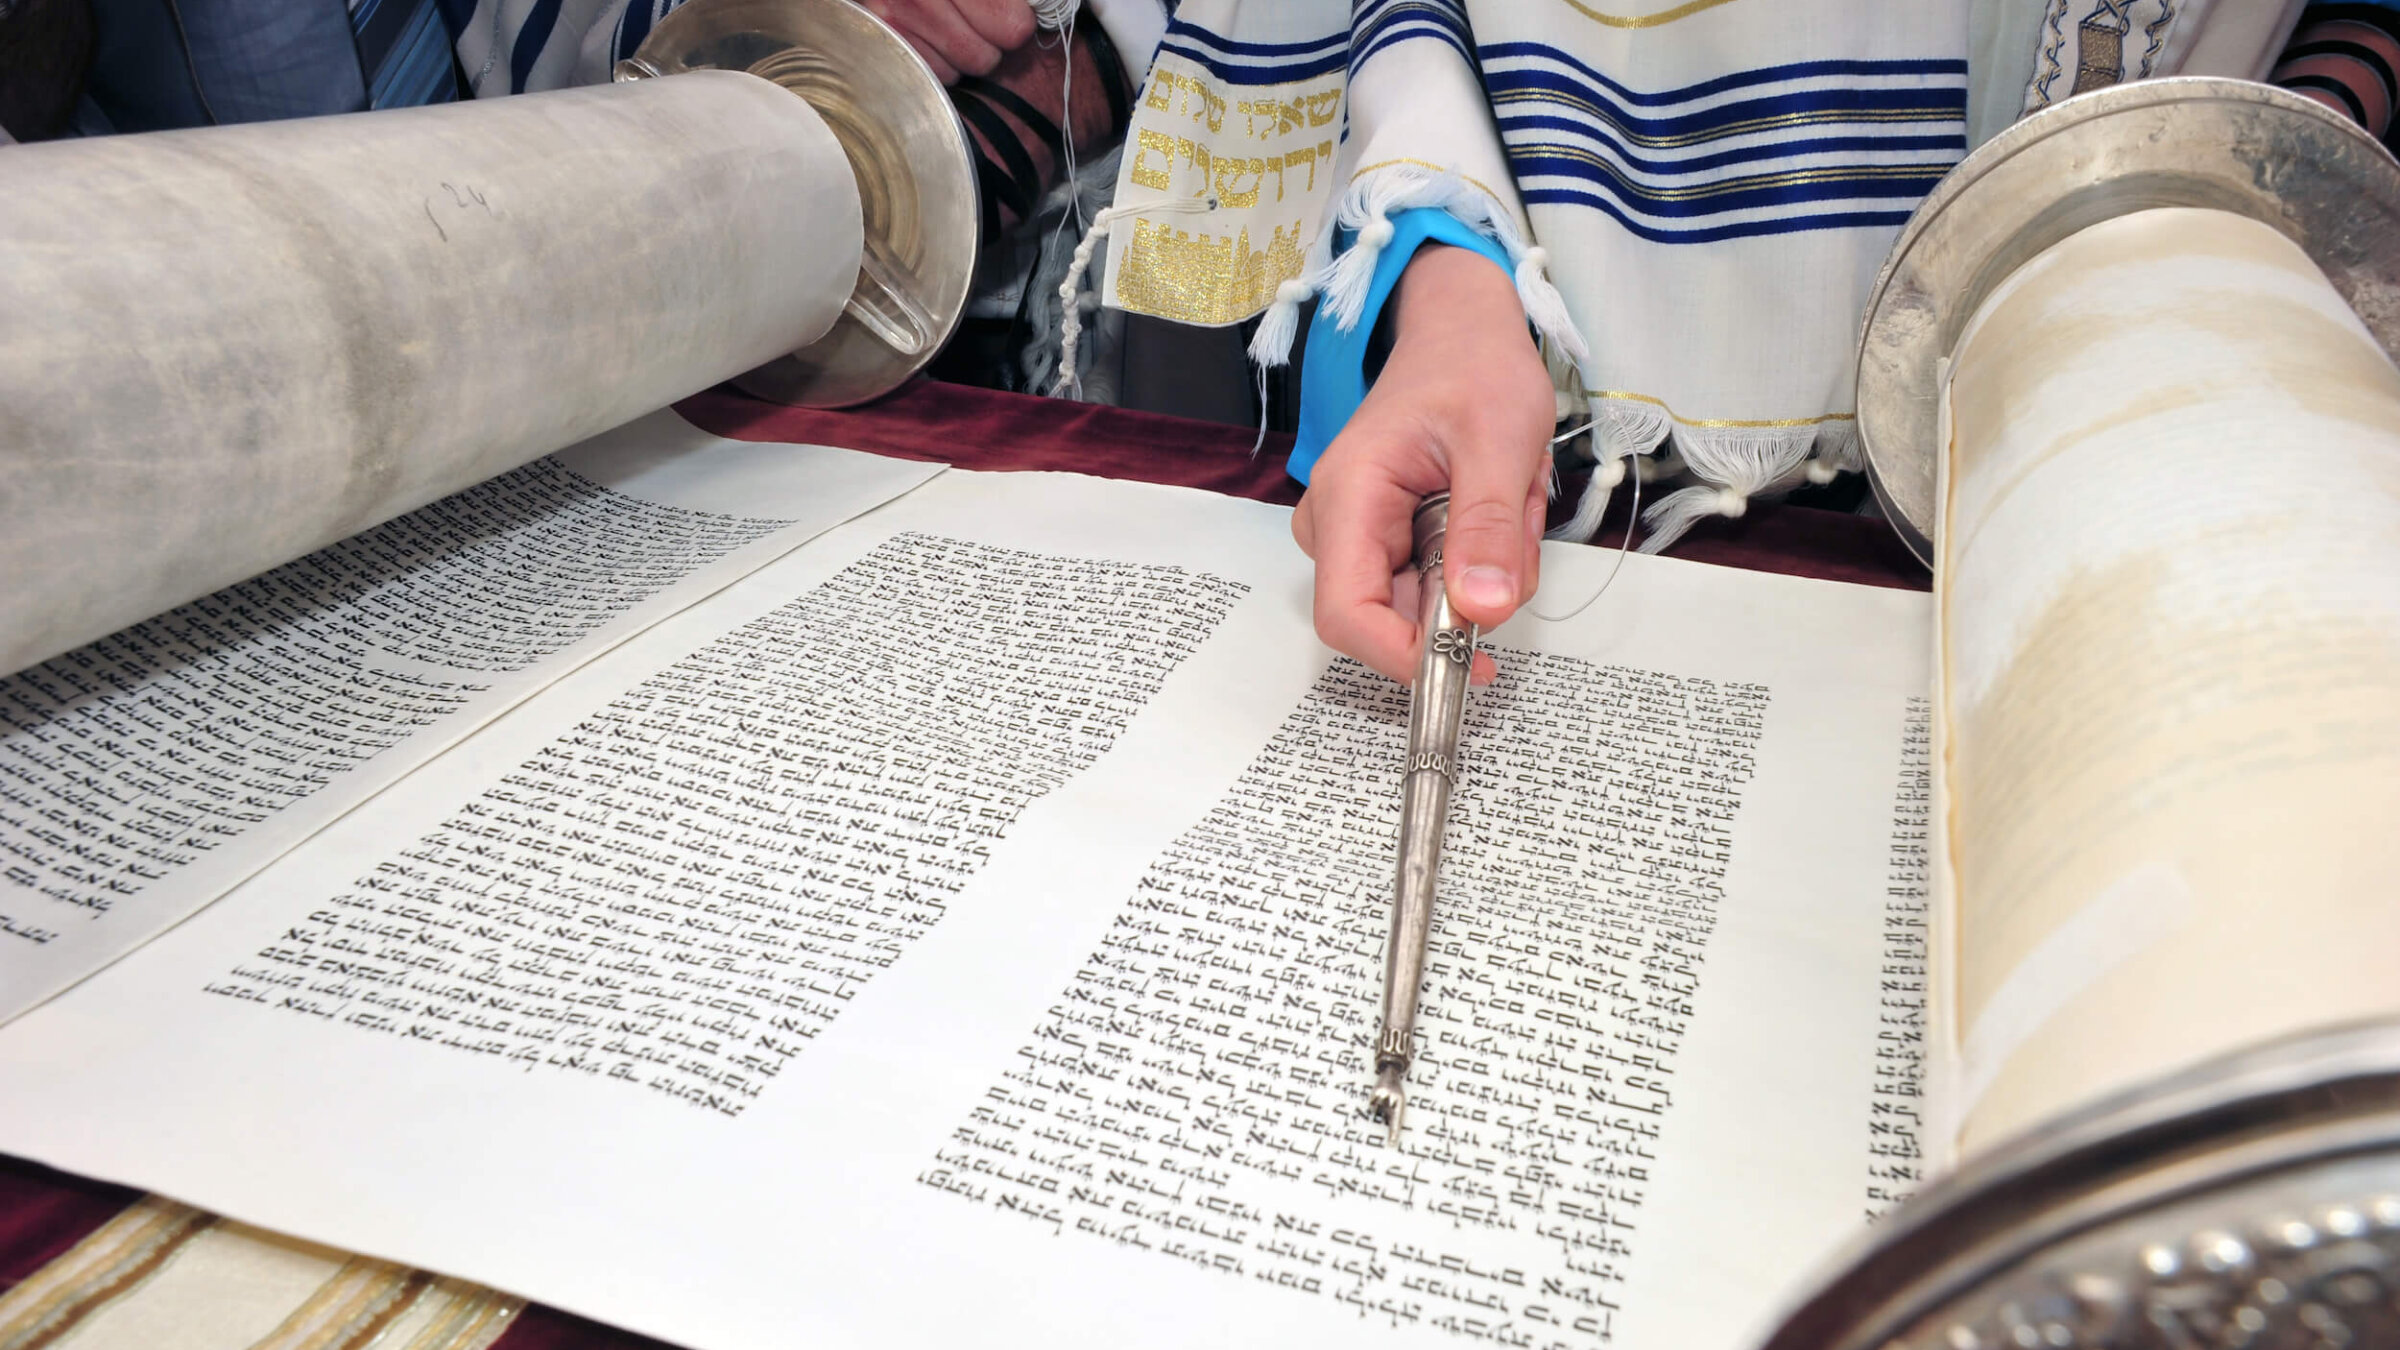 To feel fully incorporated in the Jewish world, interfaith families must have access to rabbis whose experience reflects their own.